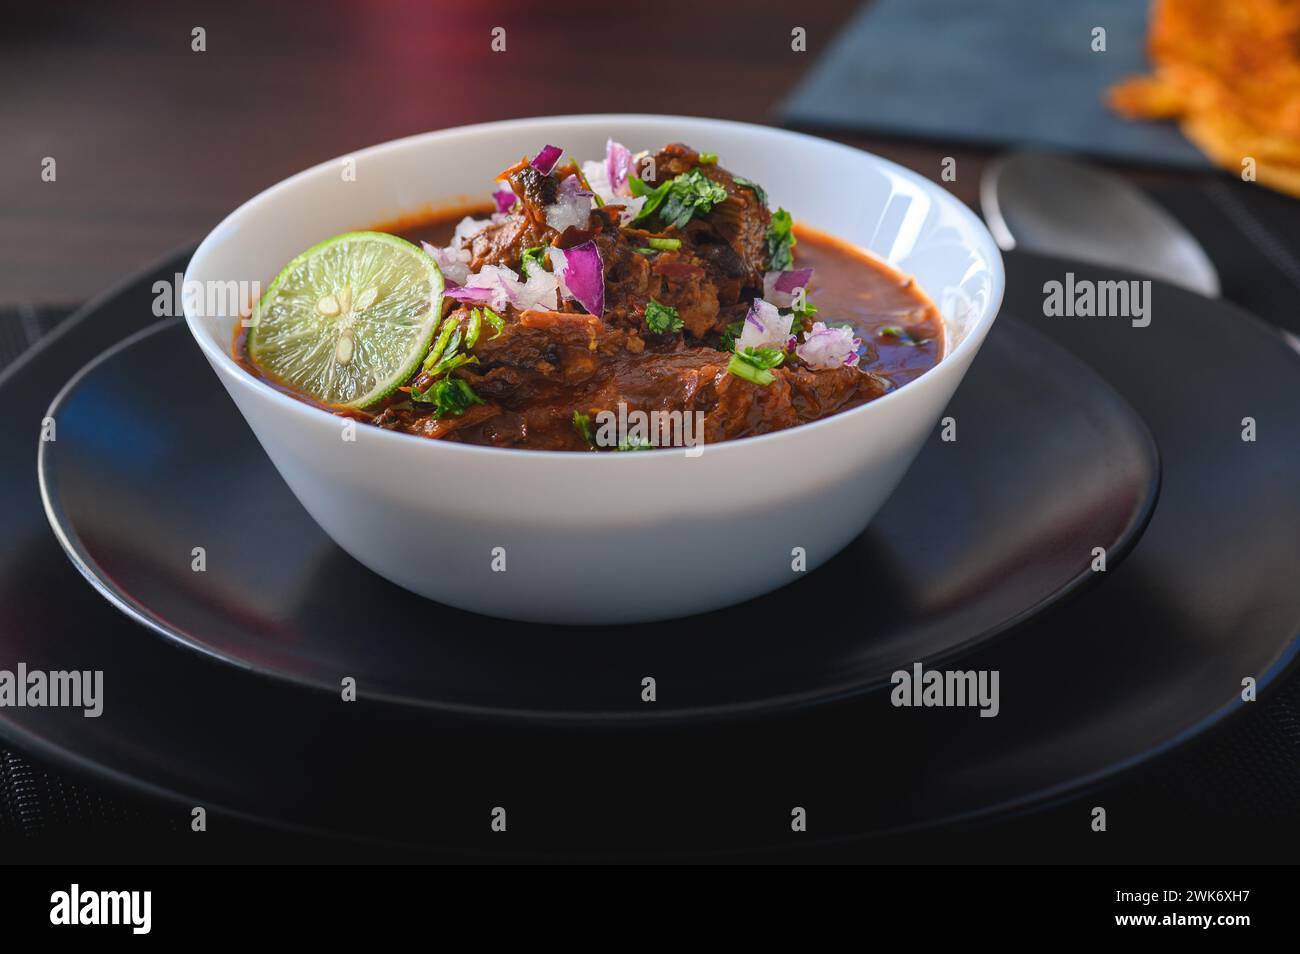 Bowl of Mexican Beef Birria Stew on Black Plates Stock Photo